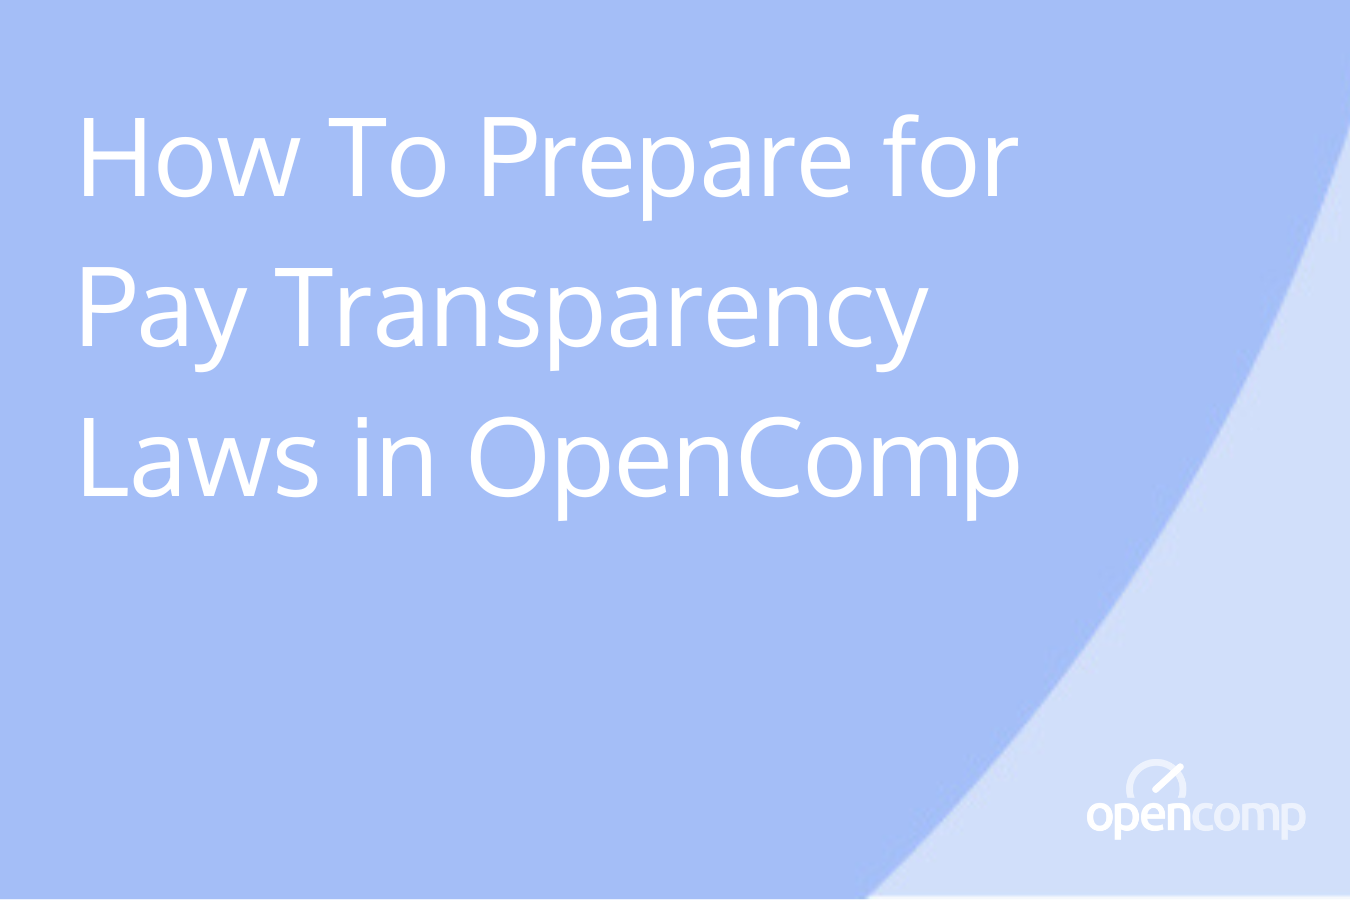 How To Prepare for Pay Transparency Laws in OpenComp-1